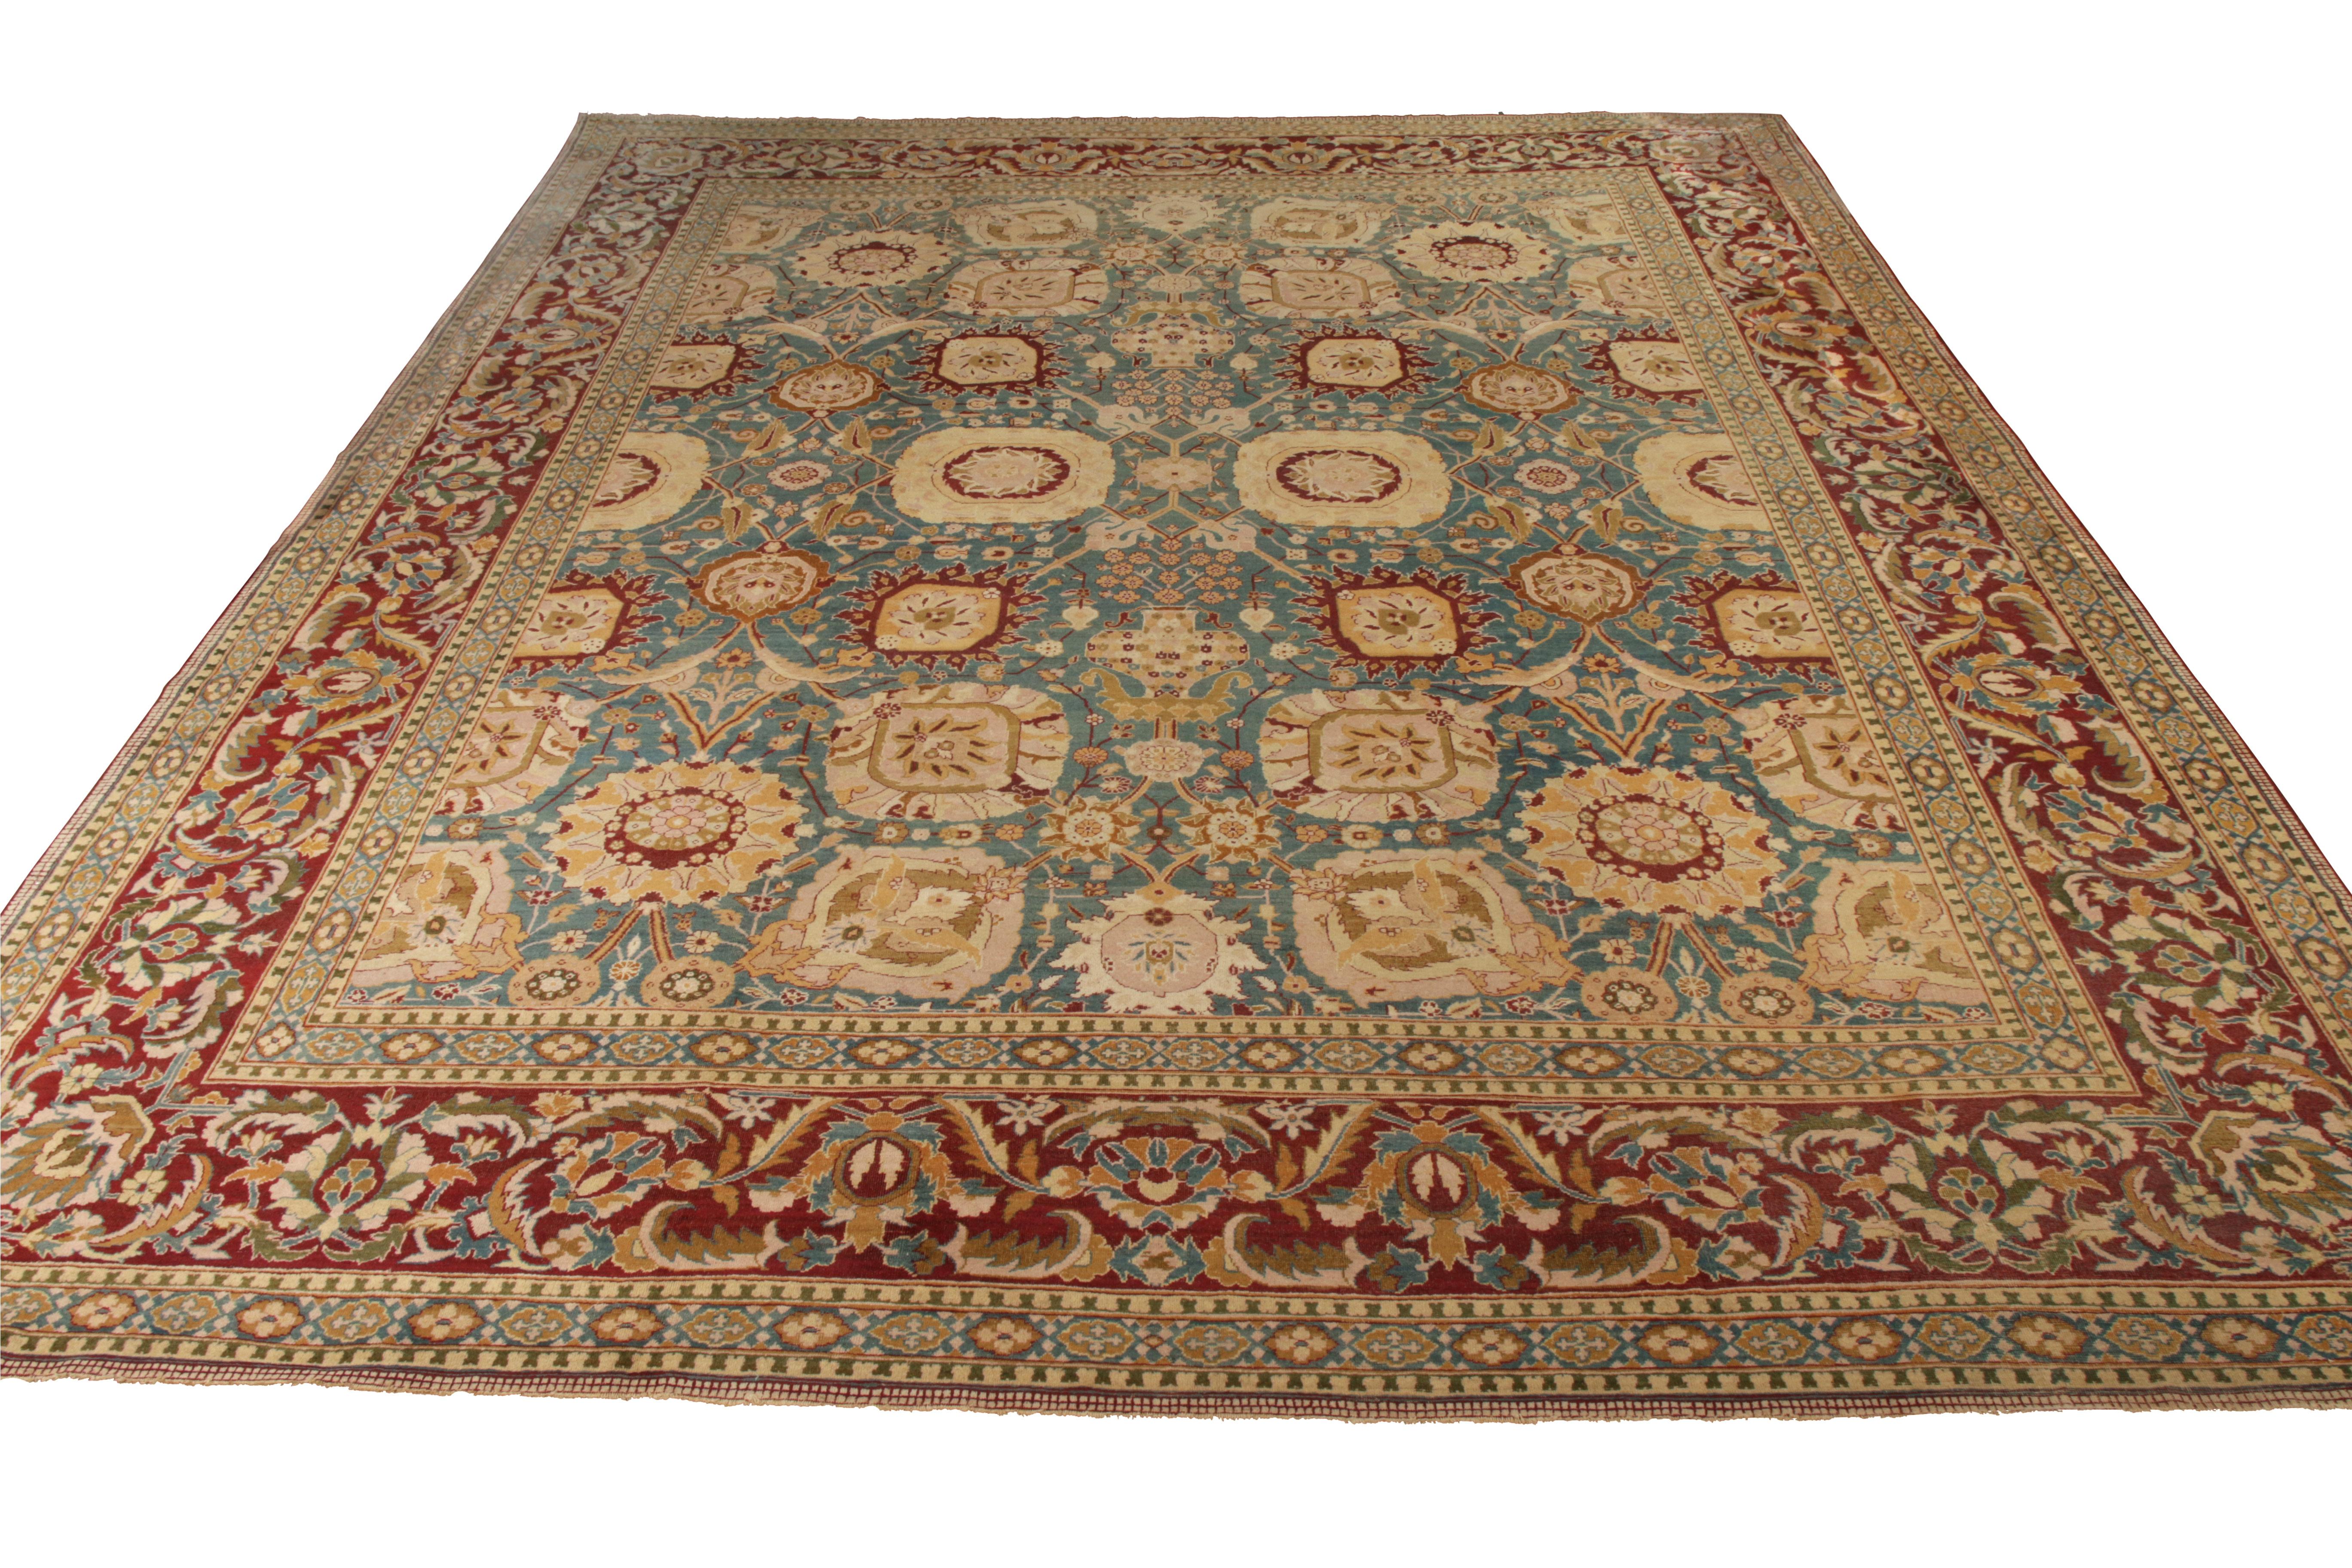 A rare 14 x 19 antique rug originating from India circa 1870-1880, among our oldest and most spacious oriental rugs. This hand-knotted wool rug connotes rare elements among antique Amritsar rugs and Agra rugs of numerous attractive distinctions.